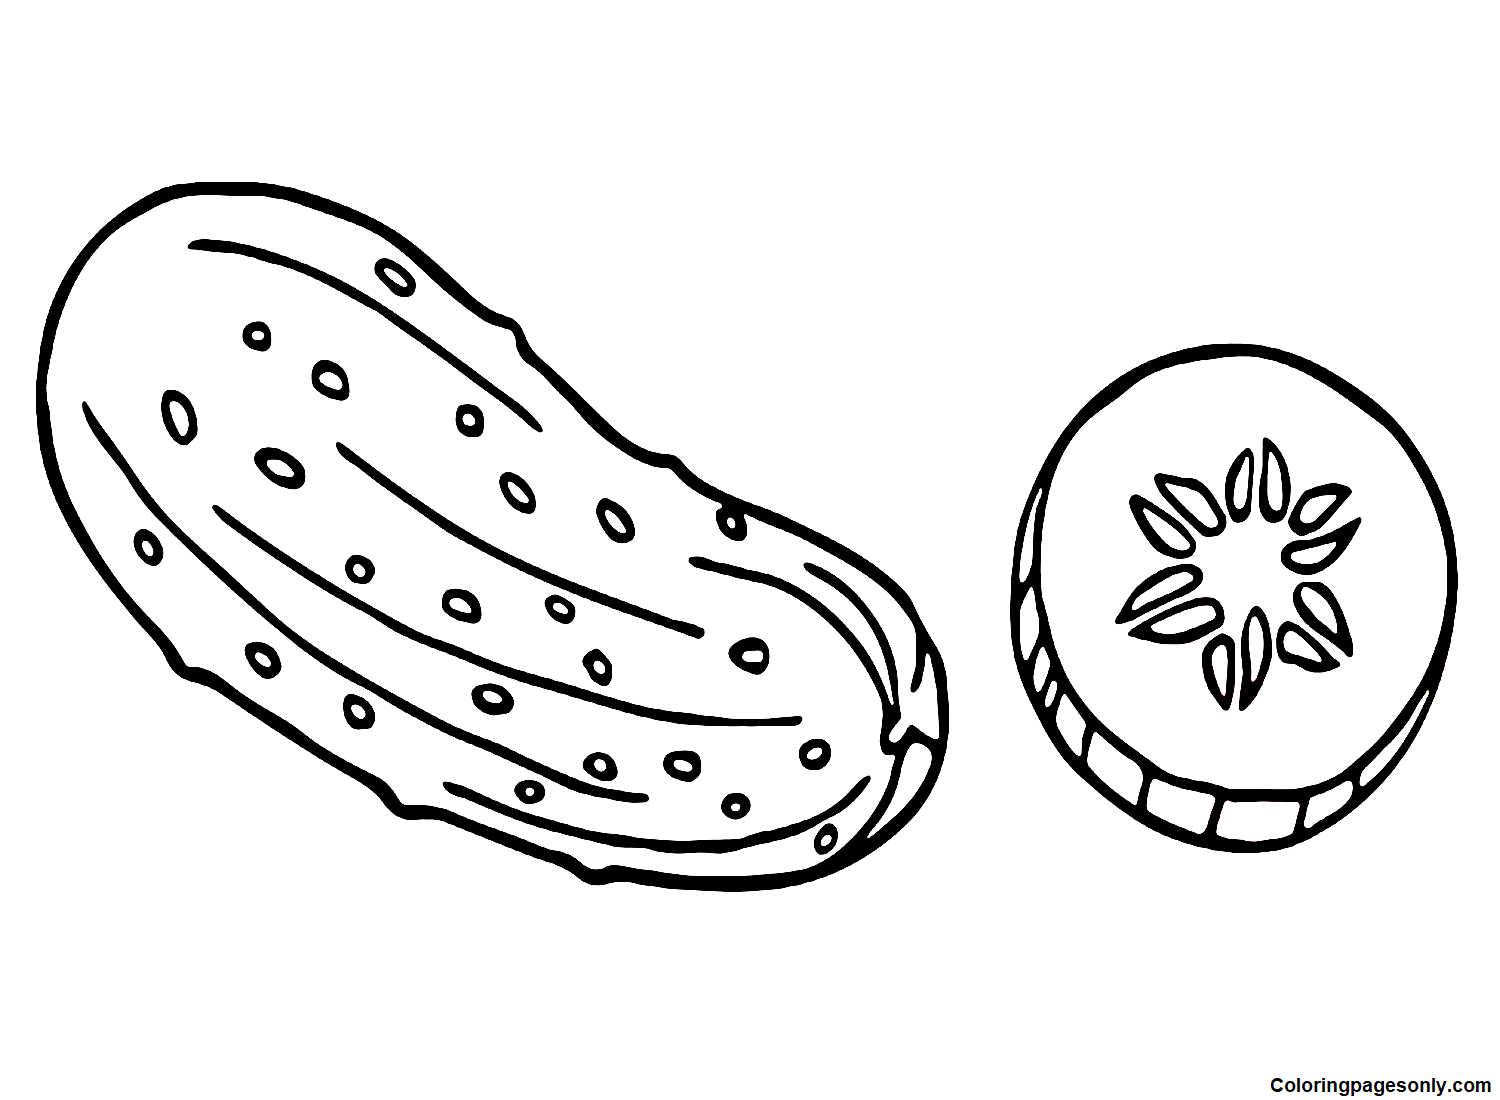 Cucumber Drawing Coloring Page